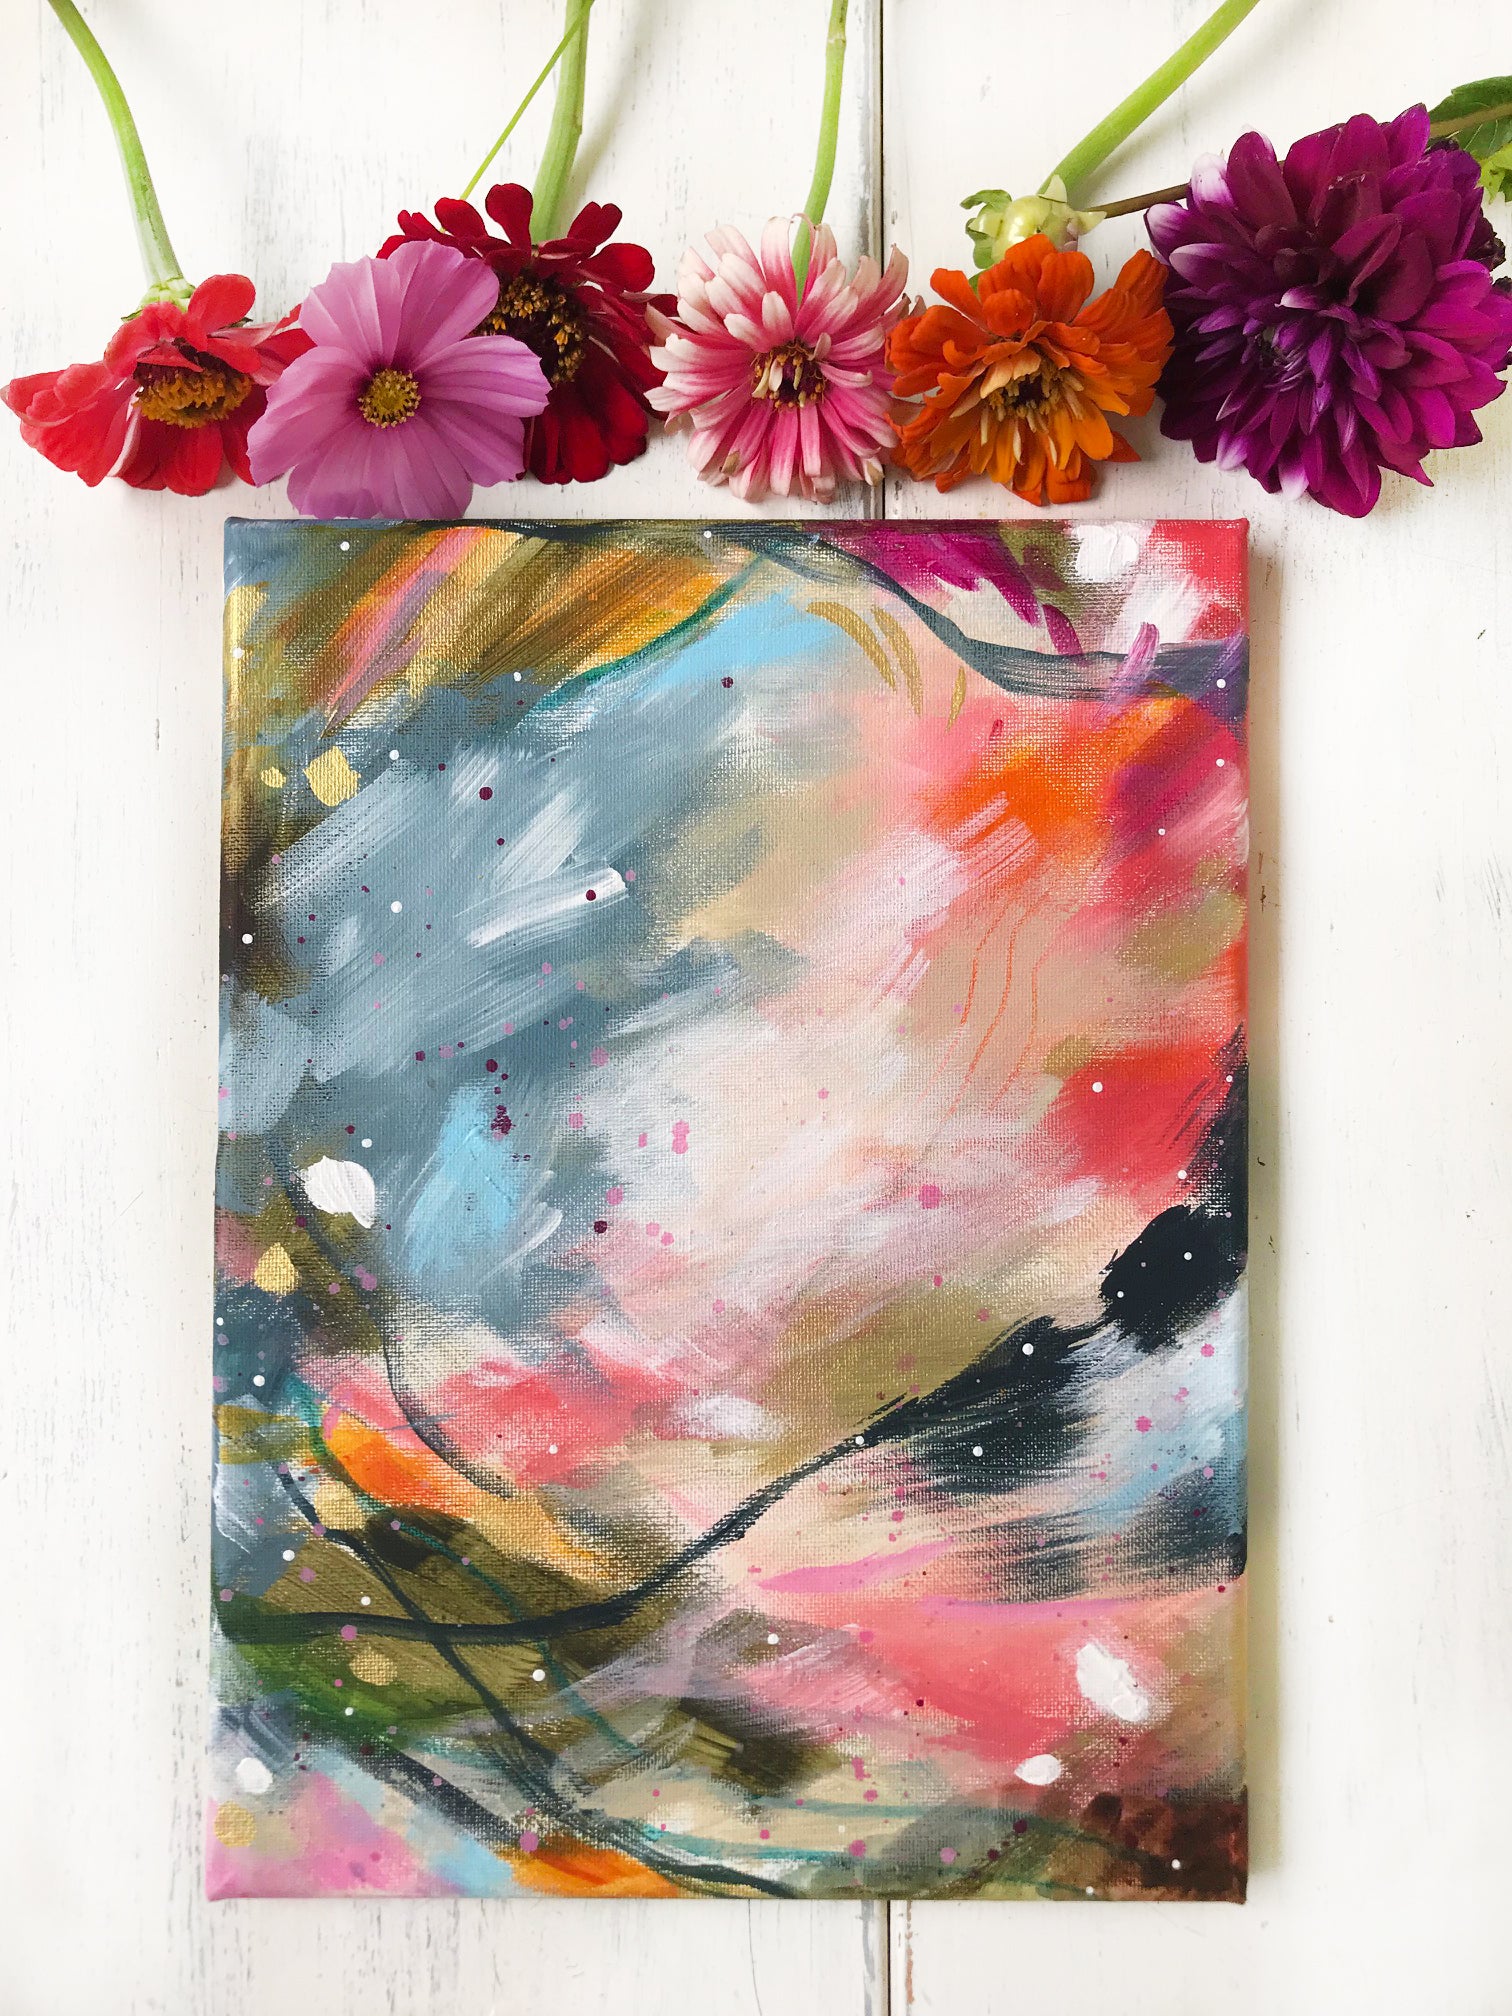 Abstract Original Painting "Golden Hour" 9x12 inch Canvas - Bethany Joy Art